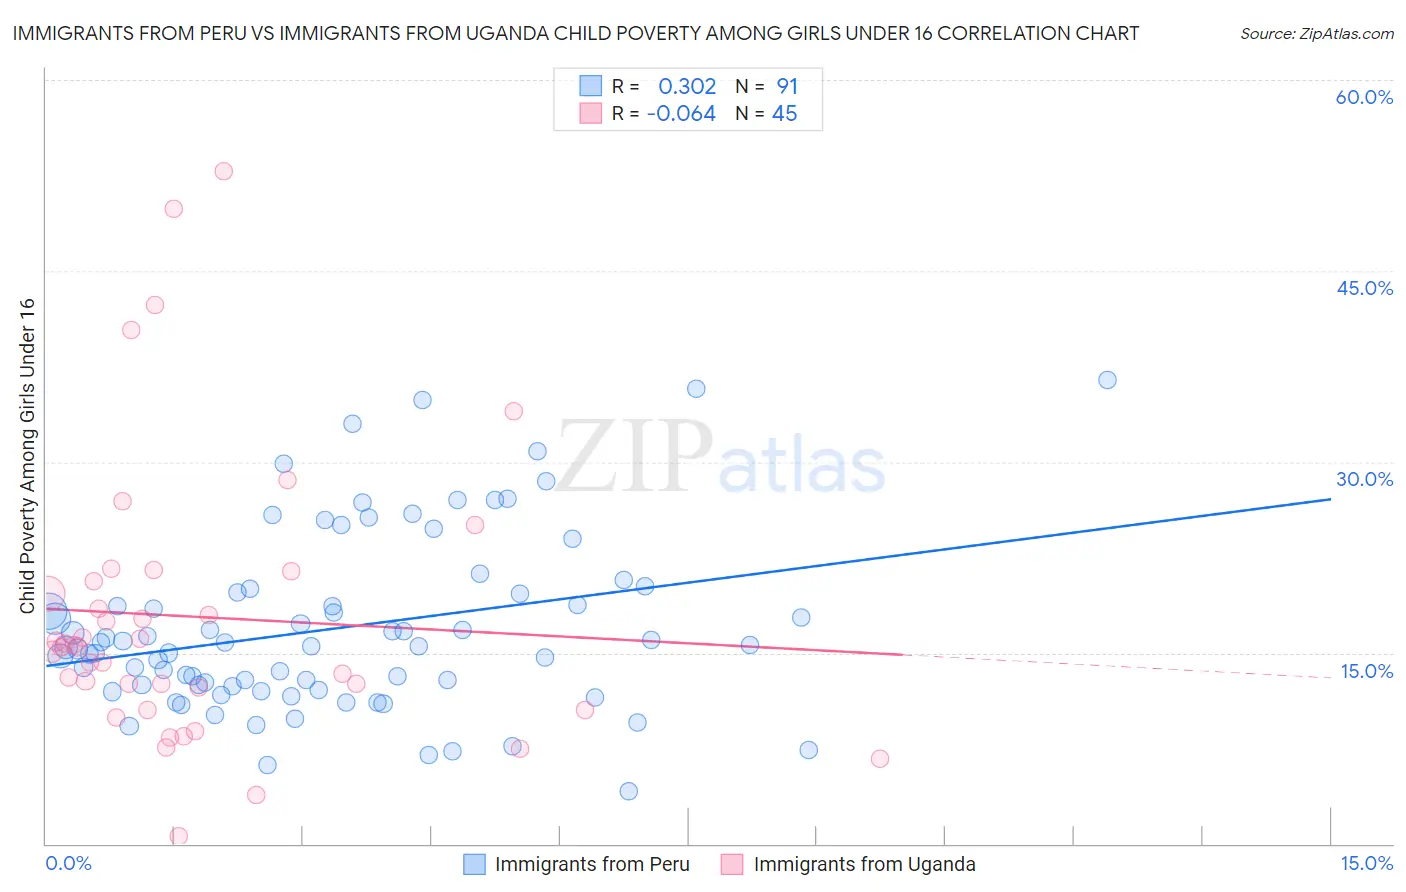 Immigrants from Peru vs Immigrants from Uganda Child Poverty Among Girls Under 16